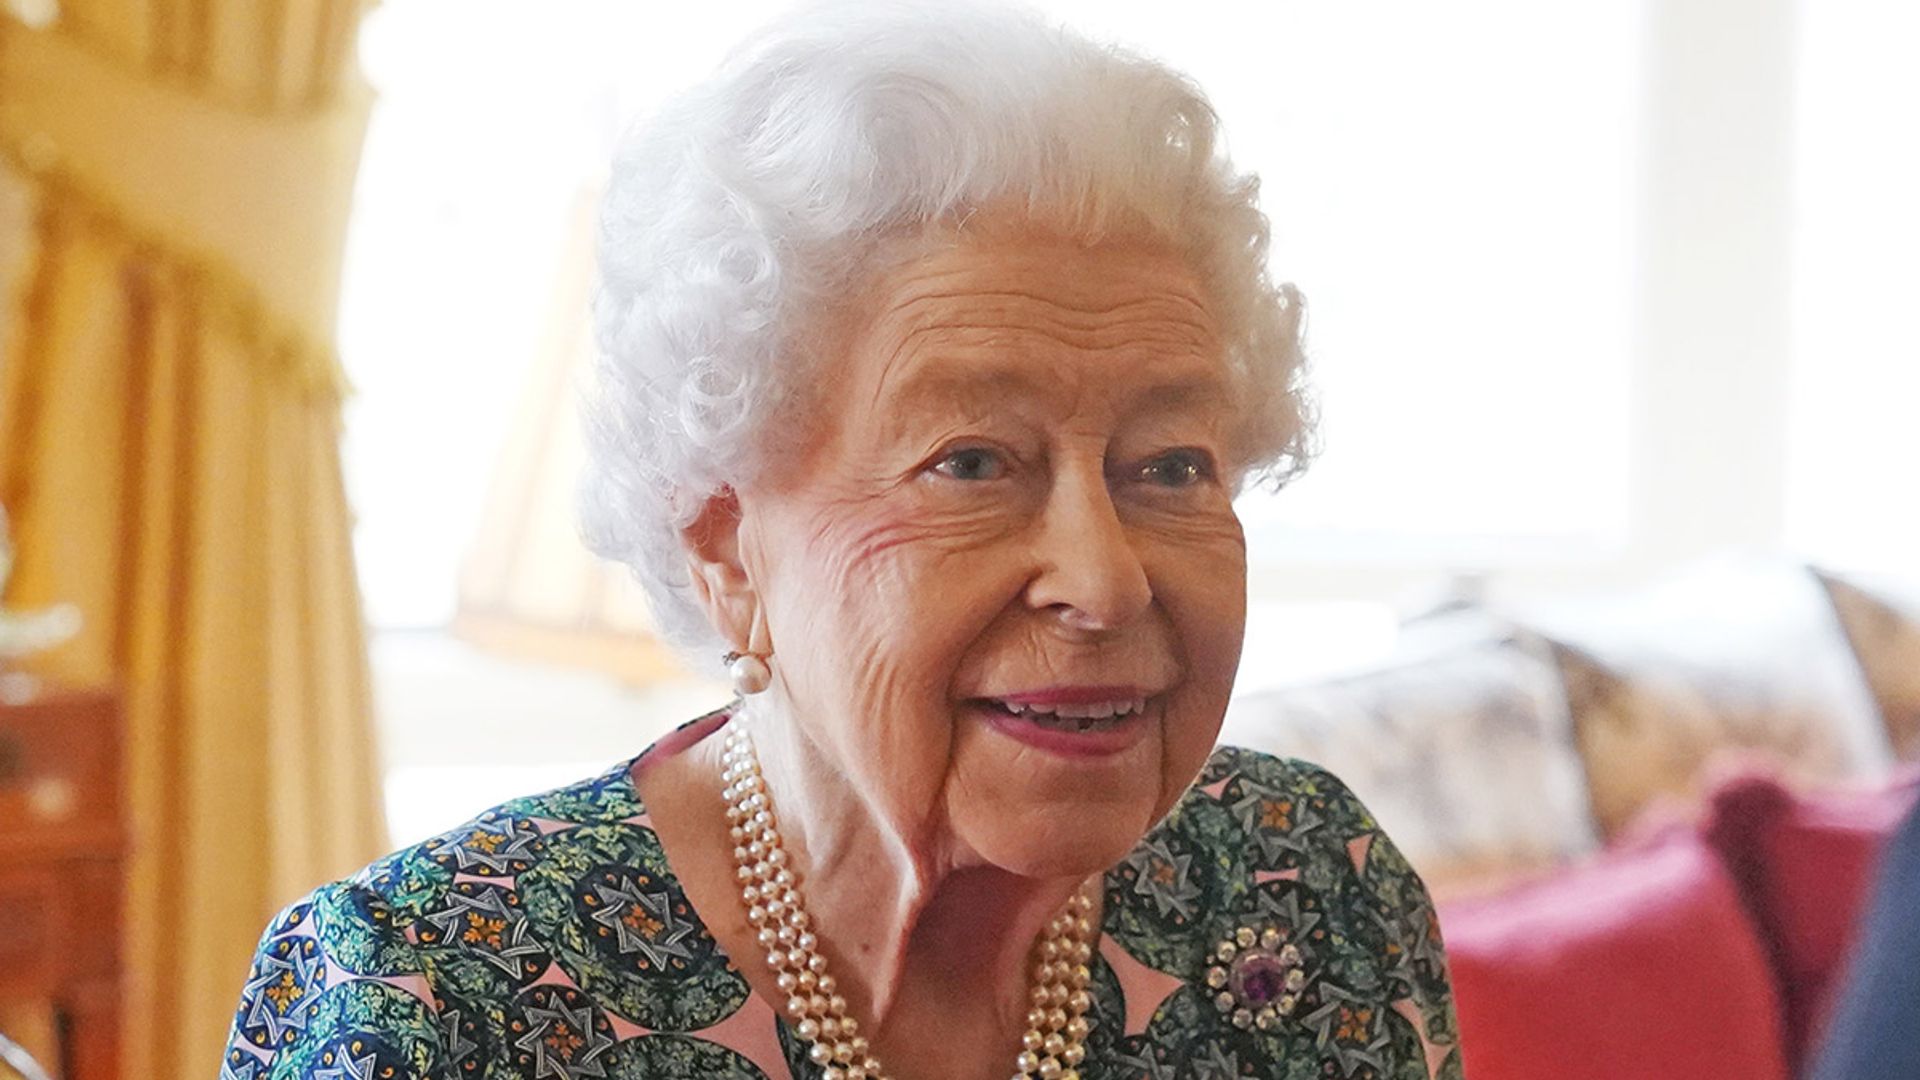 The Queen's aide shares 'stress' of cutting the monarch's hair in lockdown